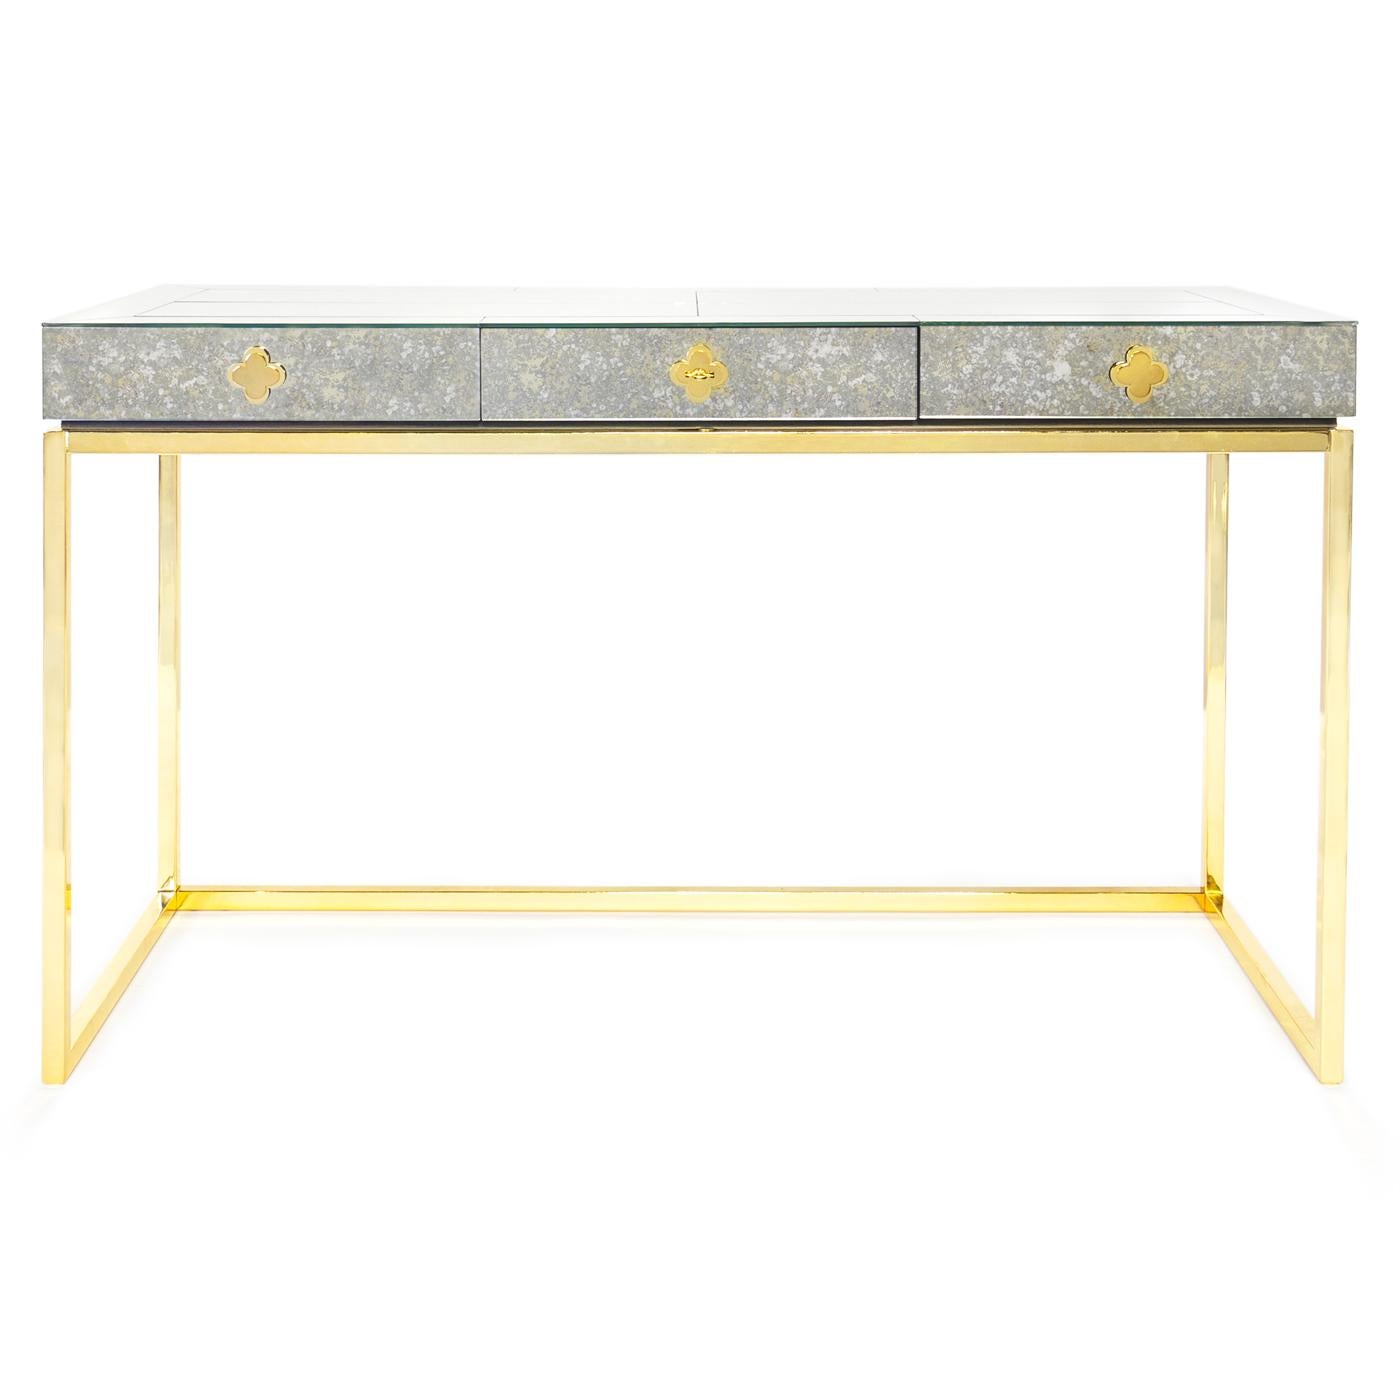 Reflectology. Minimalist forms meet Maximalist glamour. Antiqued mirror with a polished brass base. Our Delphine Desk features a single center drawer finished with bright robin's egg blue lacquer. Perfect in a starlet's study or as a bold finish for